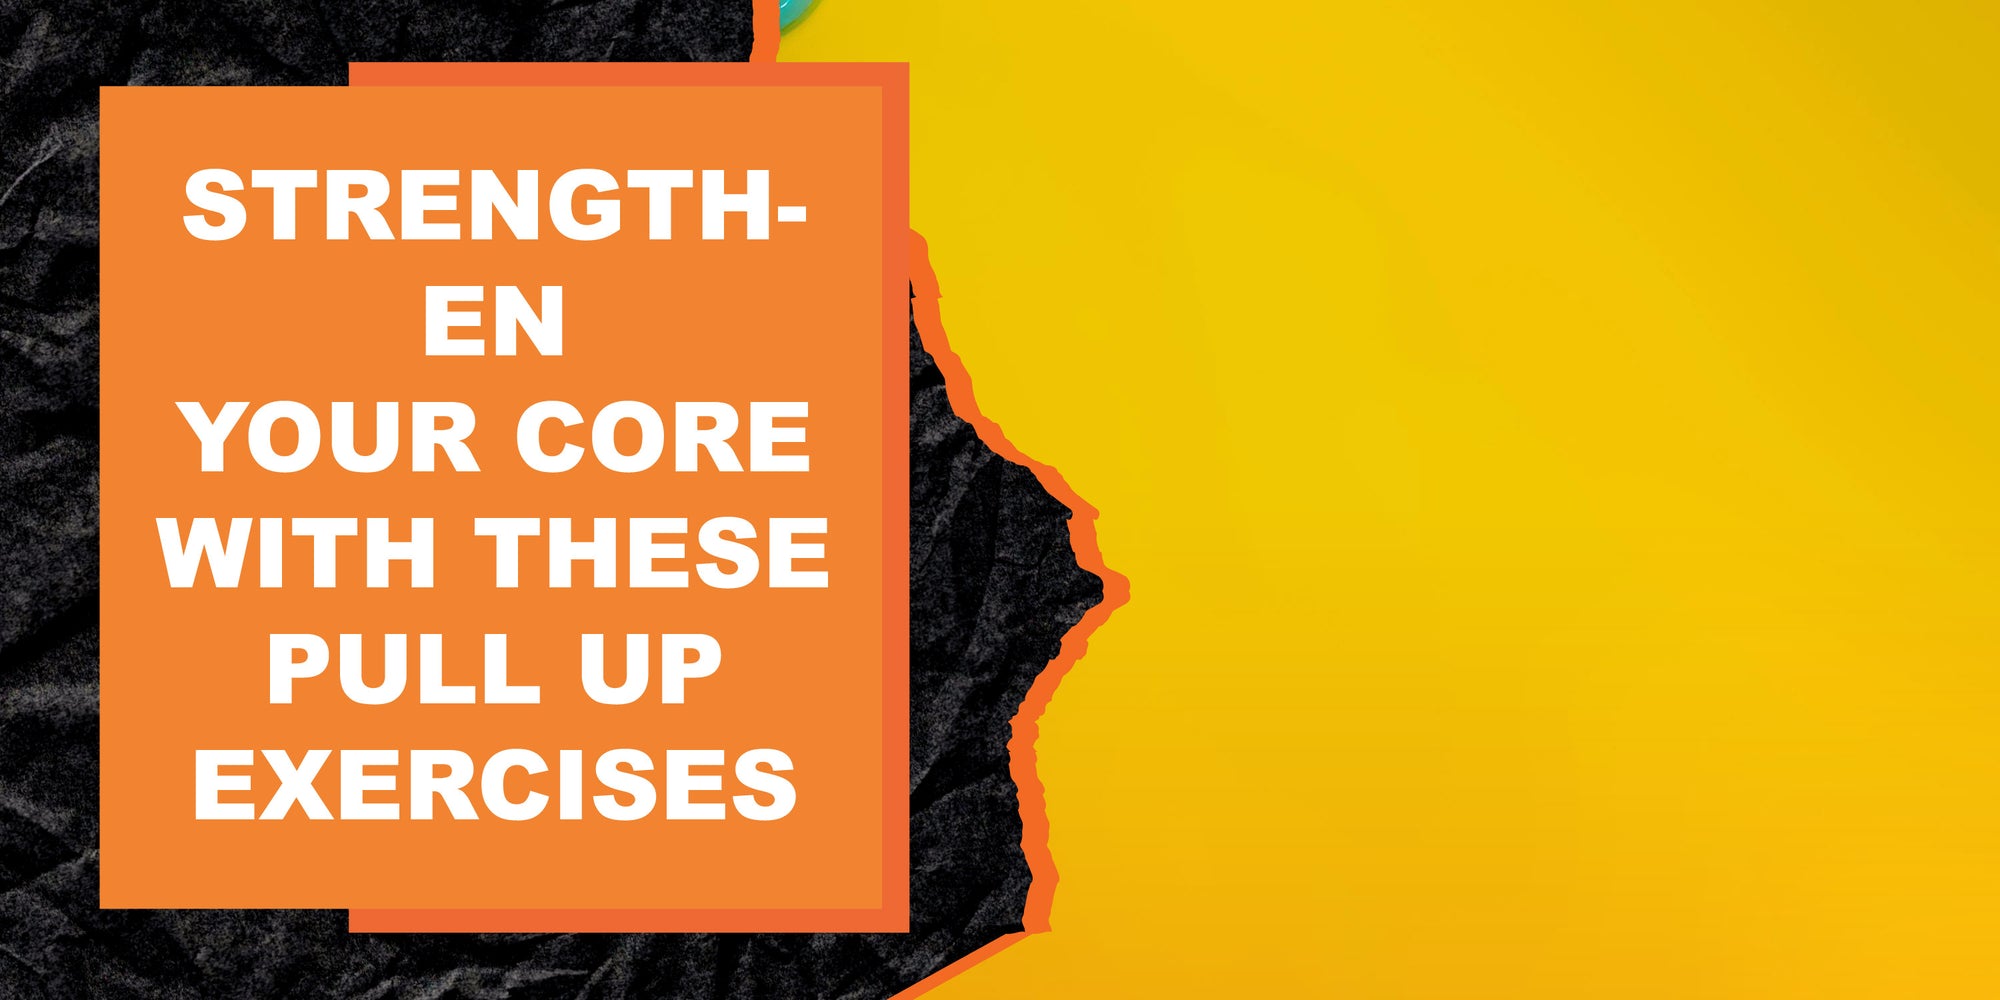 Strengthen Your Core With These Pull Up Exercises